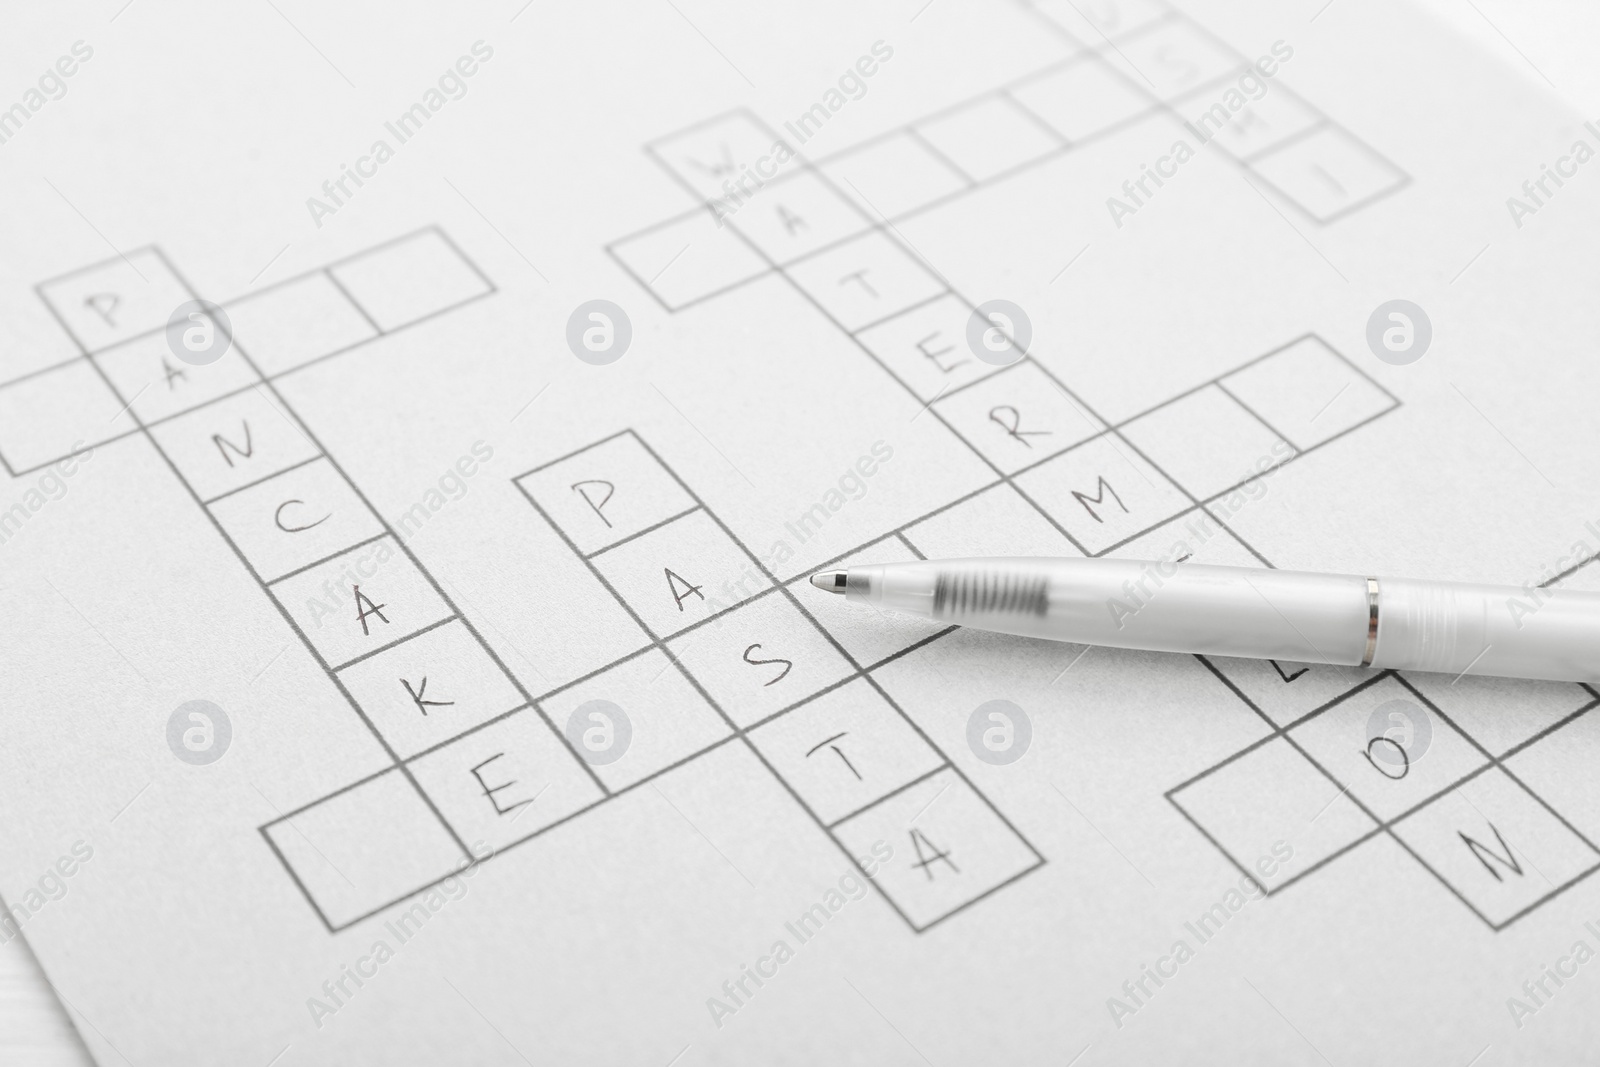 Photo of Crossword with answers and pen, closeup view